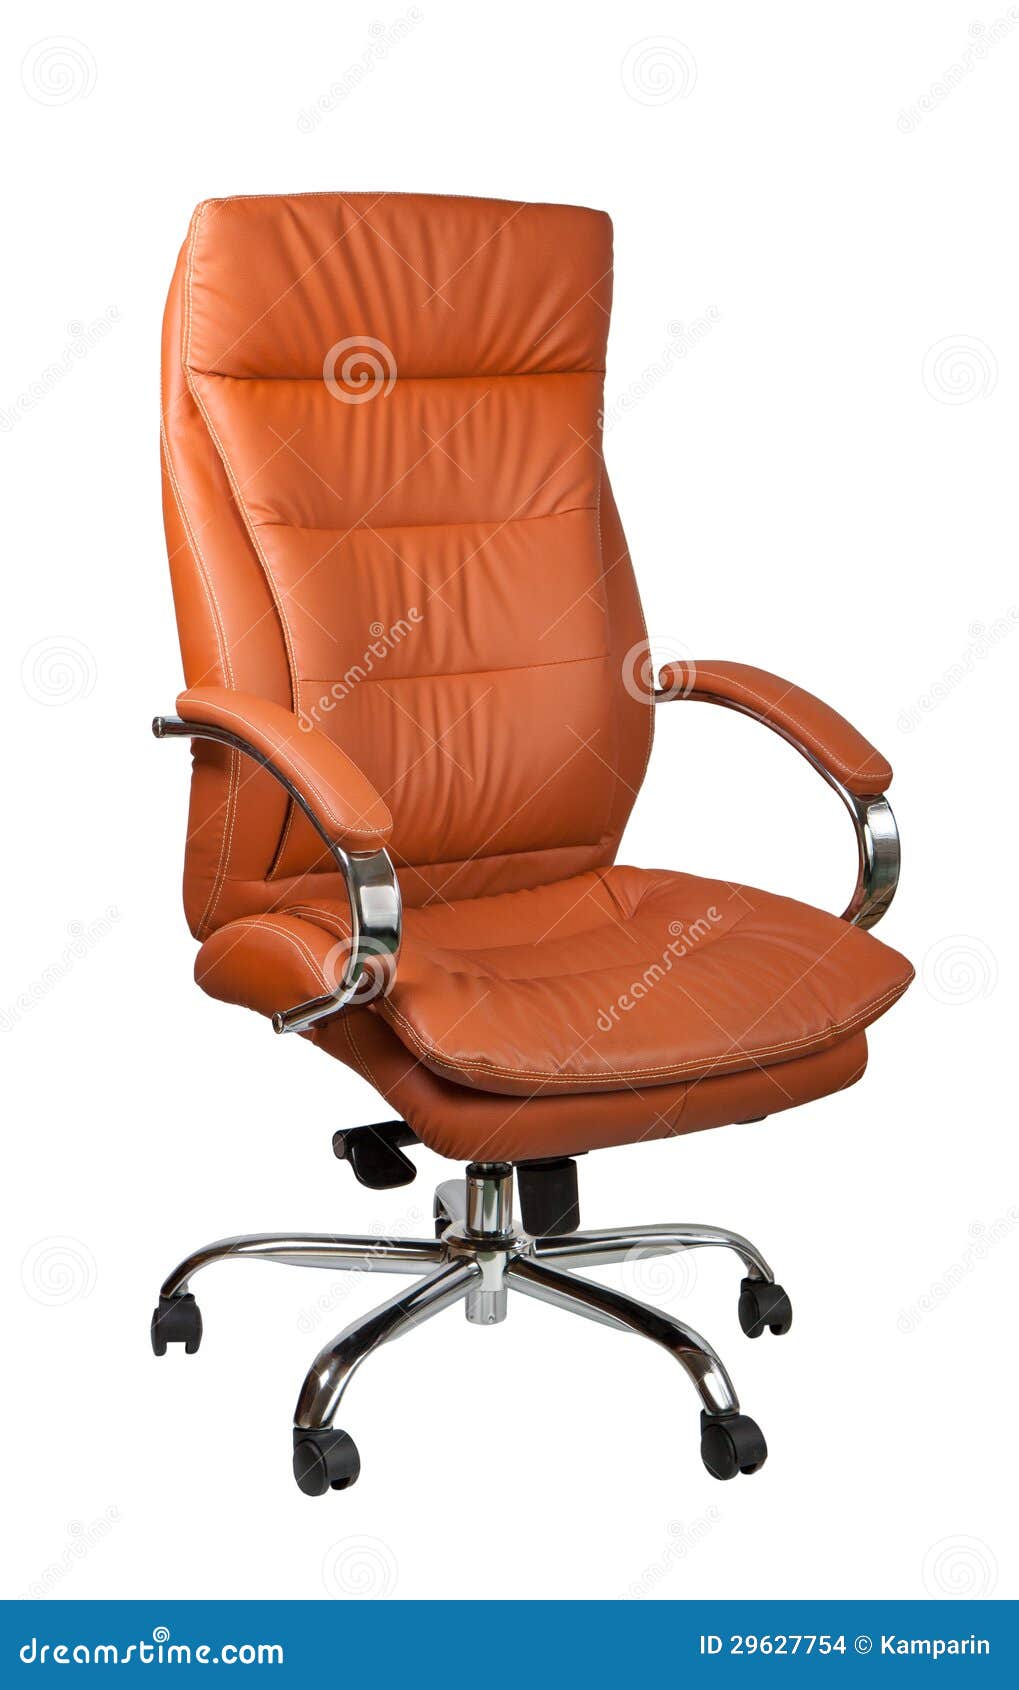 Computer leather chair stock photo. Image of furniture - 29627754